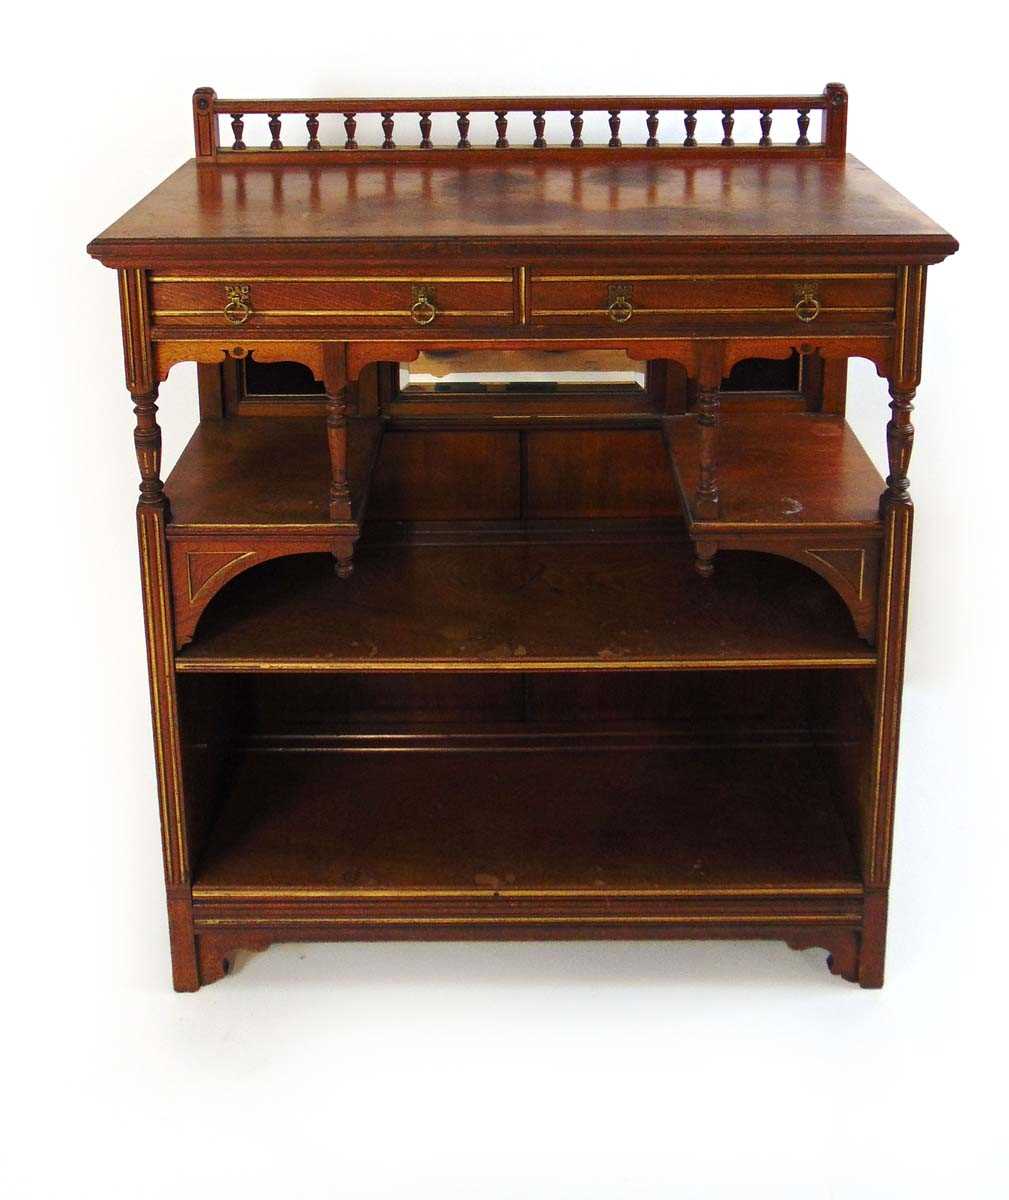 A Gillow & Co walnut side cabinet, 19th century, with spindle gallery above two short drawers in - Image 2 of 3